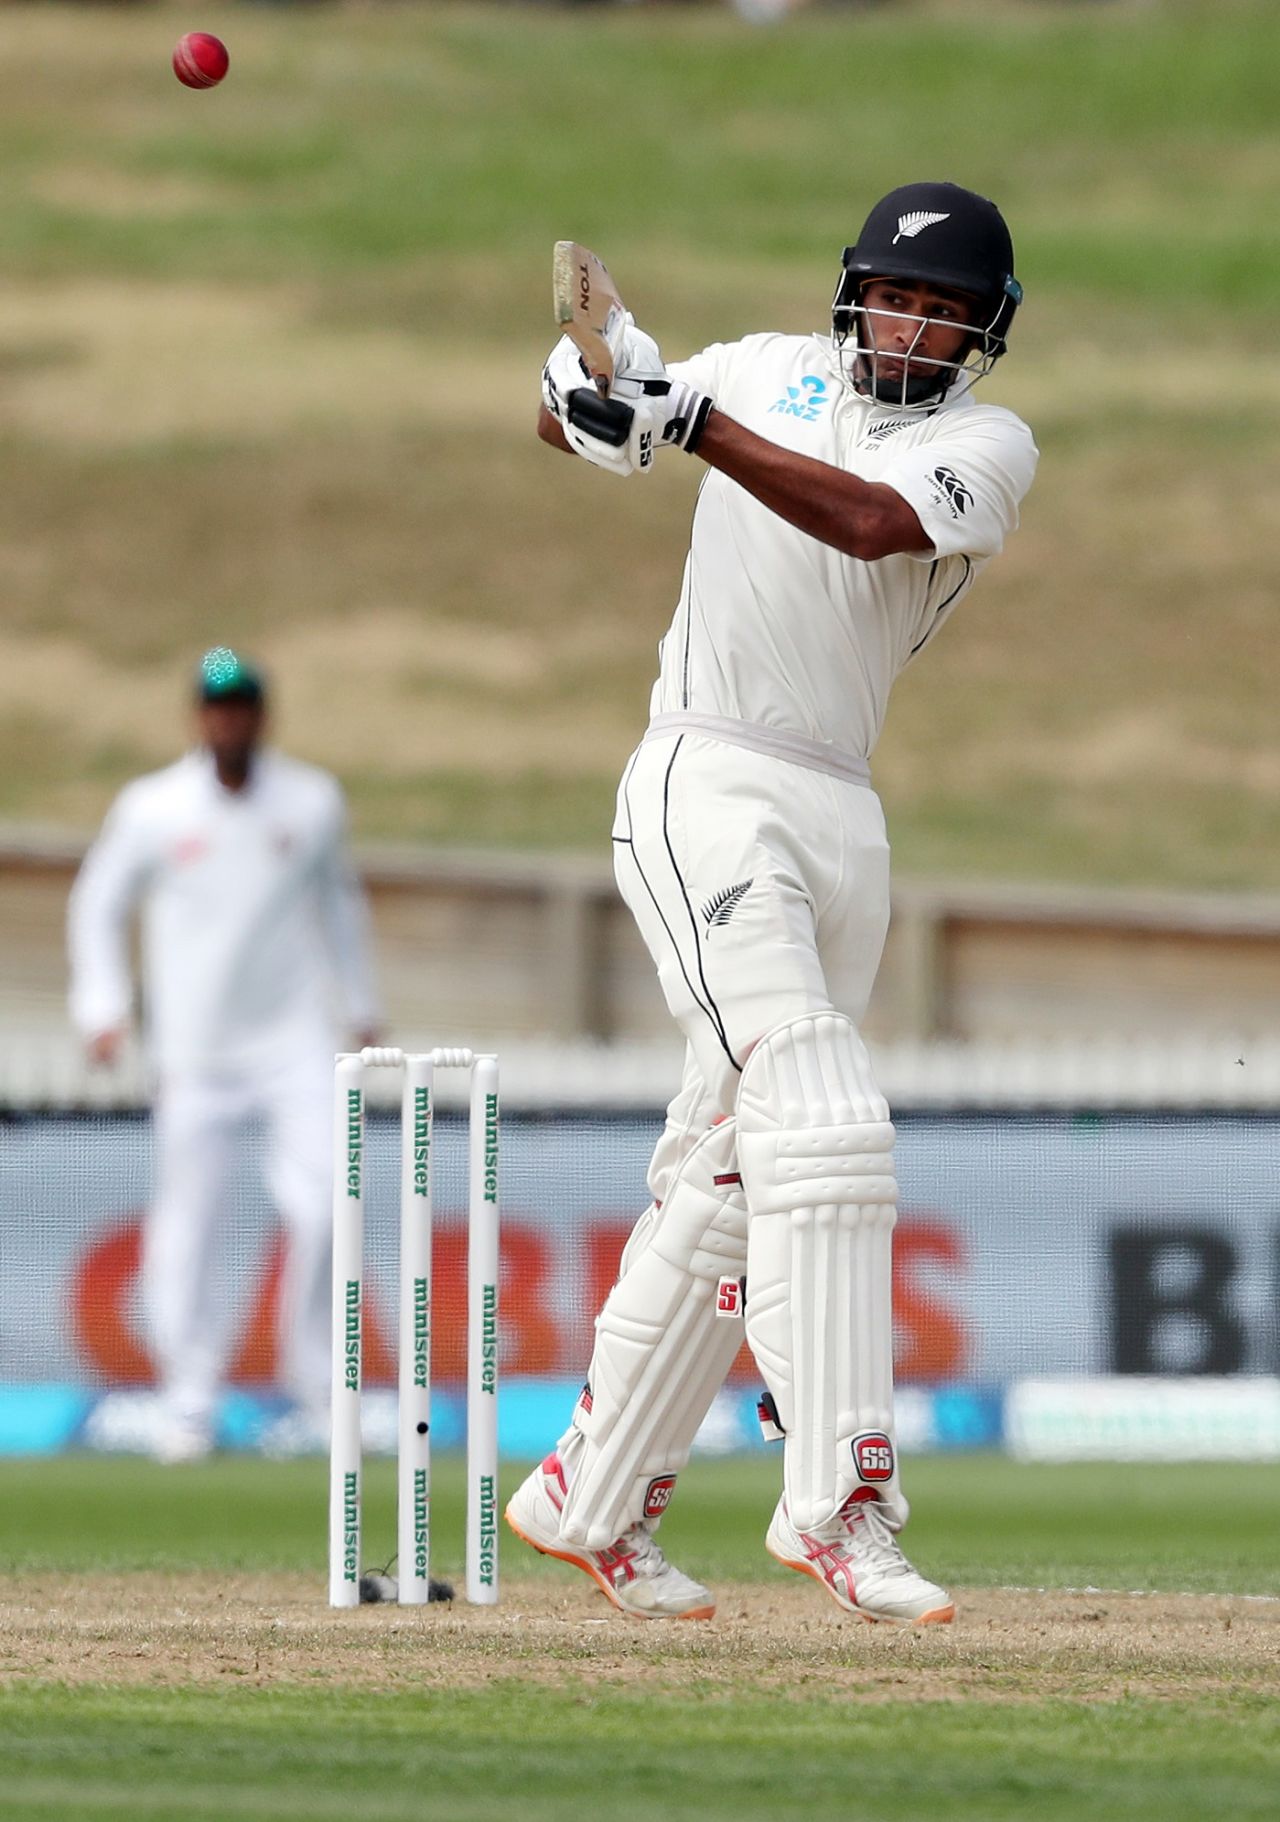 Jeet Raval pulls one on the way to his maiden Test century, New Zealand v Bangladesh, 1st Test, Hamilton, 2nd day, March 1, 2019